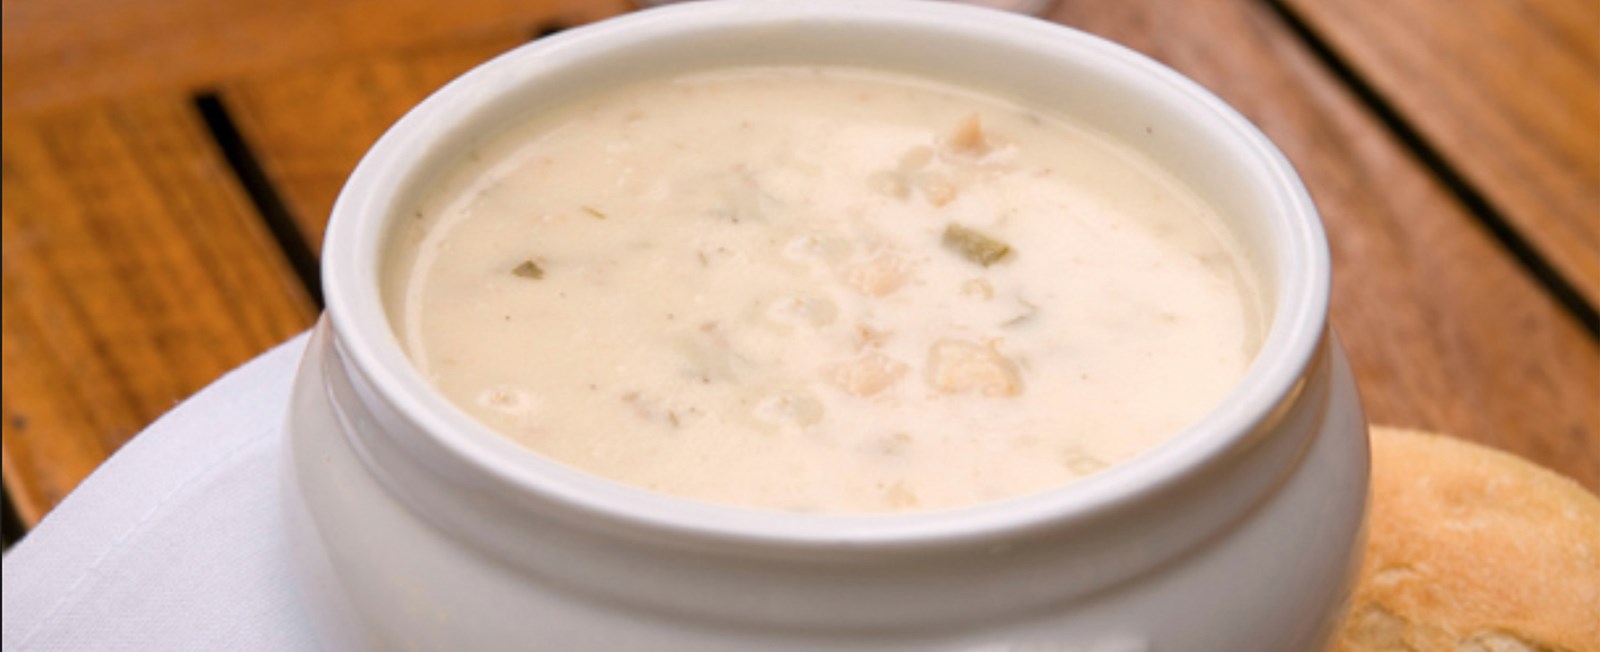 Clam chowder, a Cape Cod staple and favorite of many. Here’s mom’s recipe!